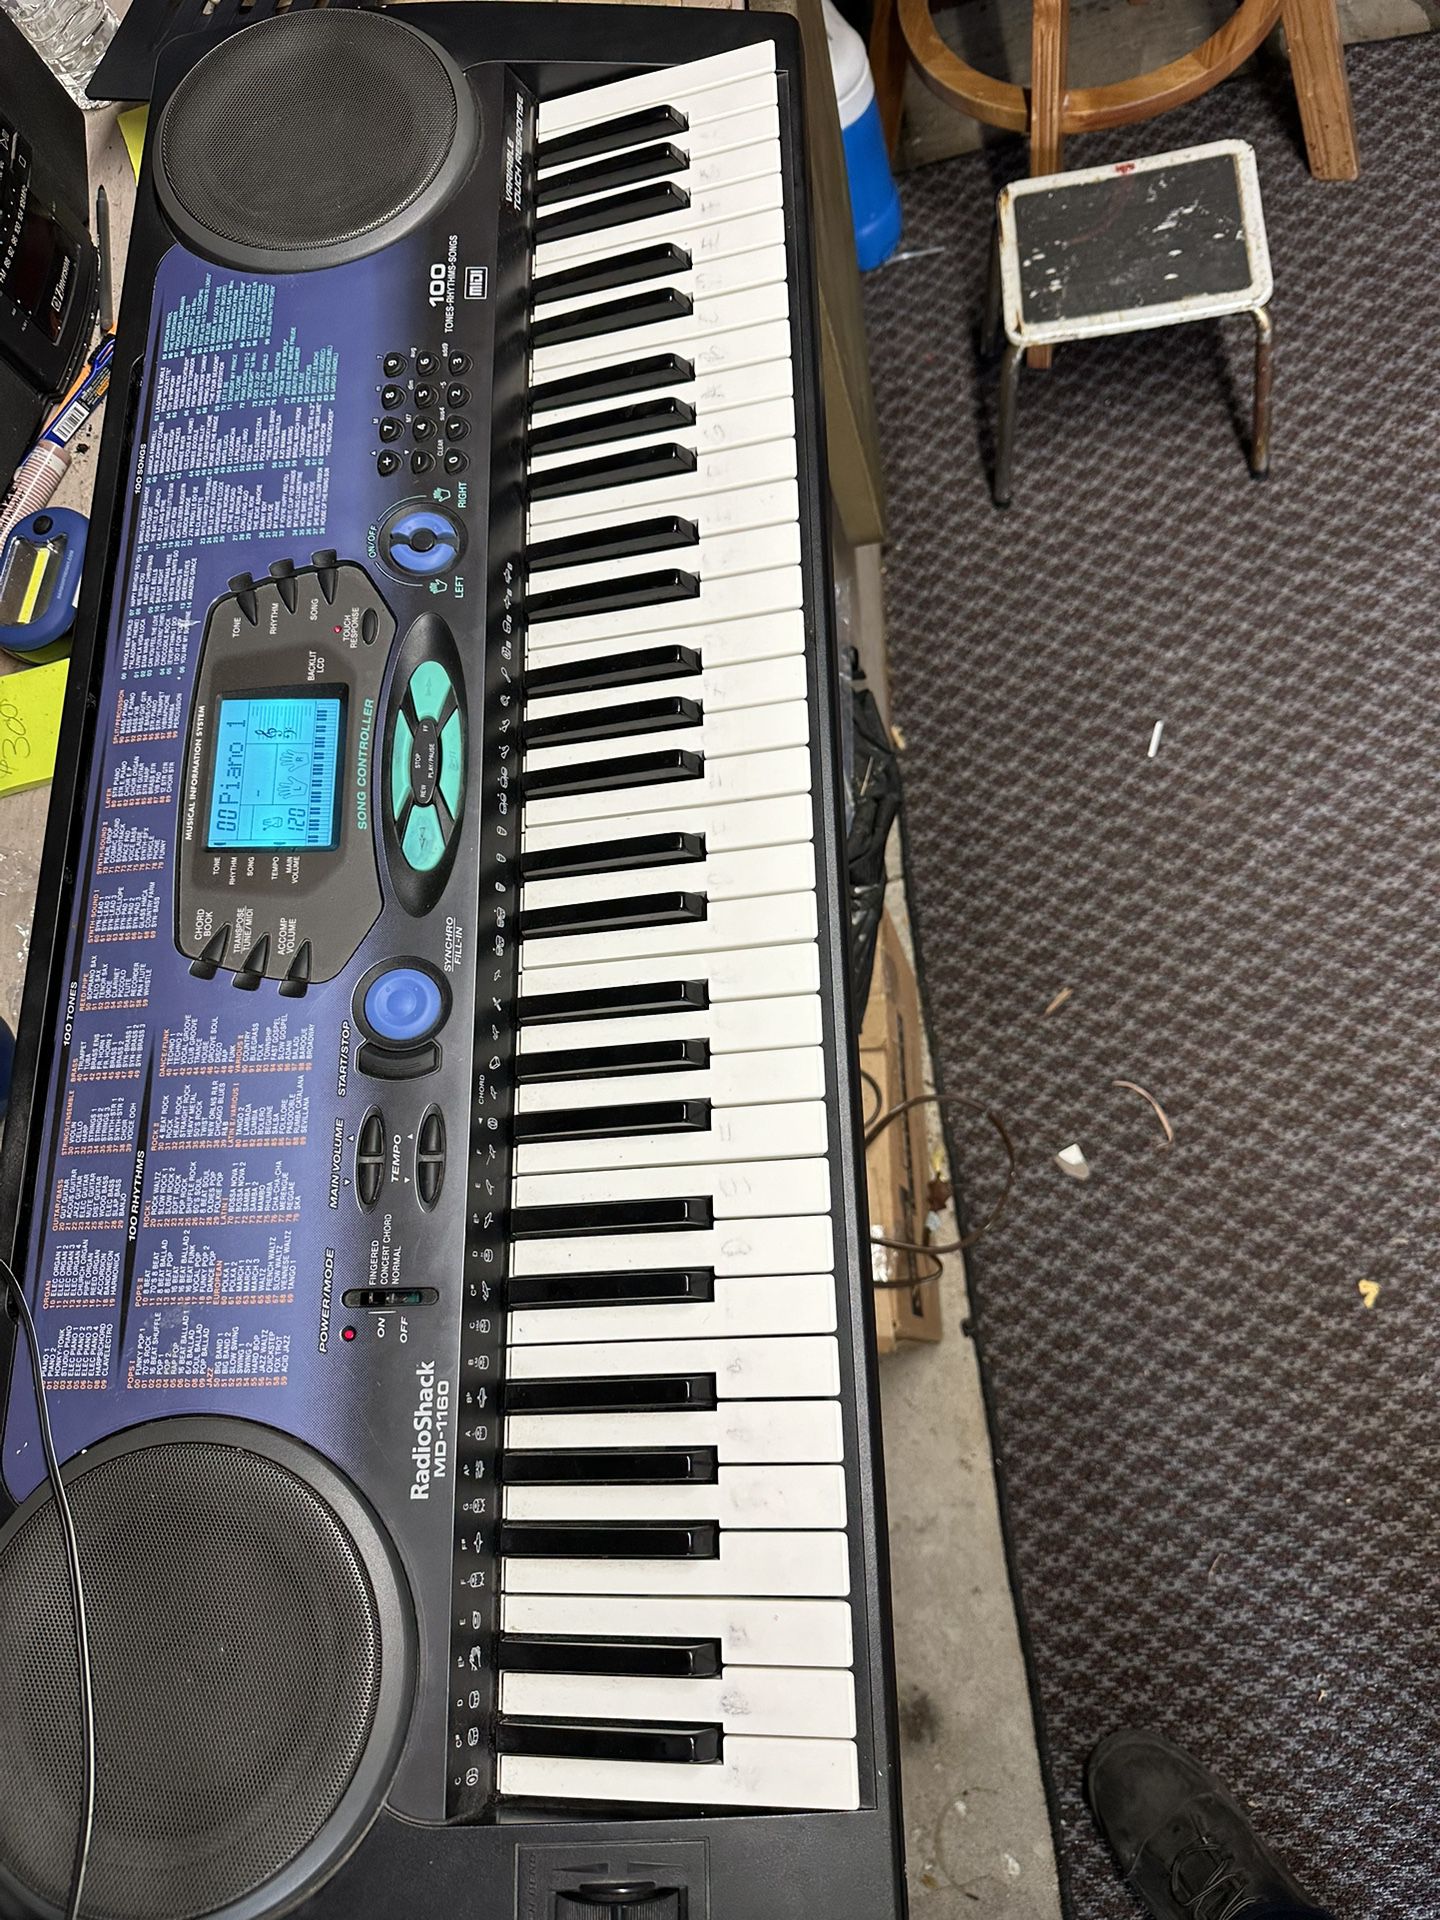 Keyboard With Stand